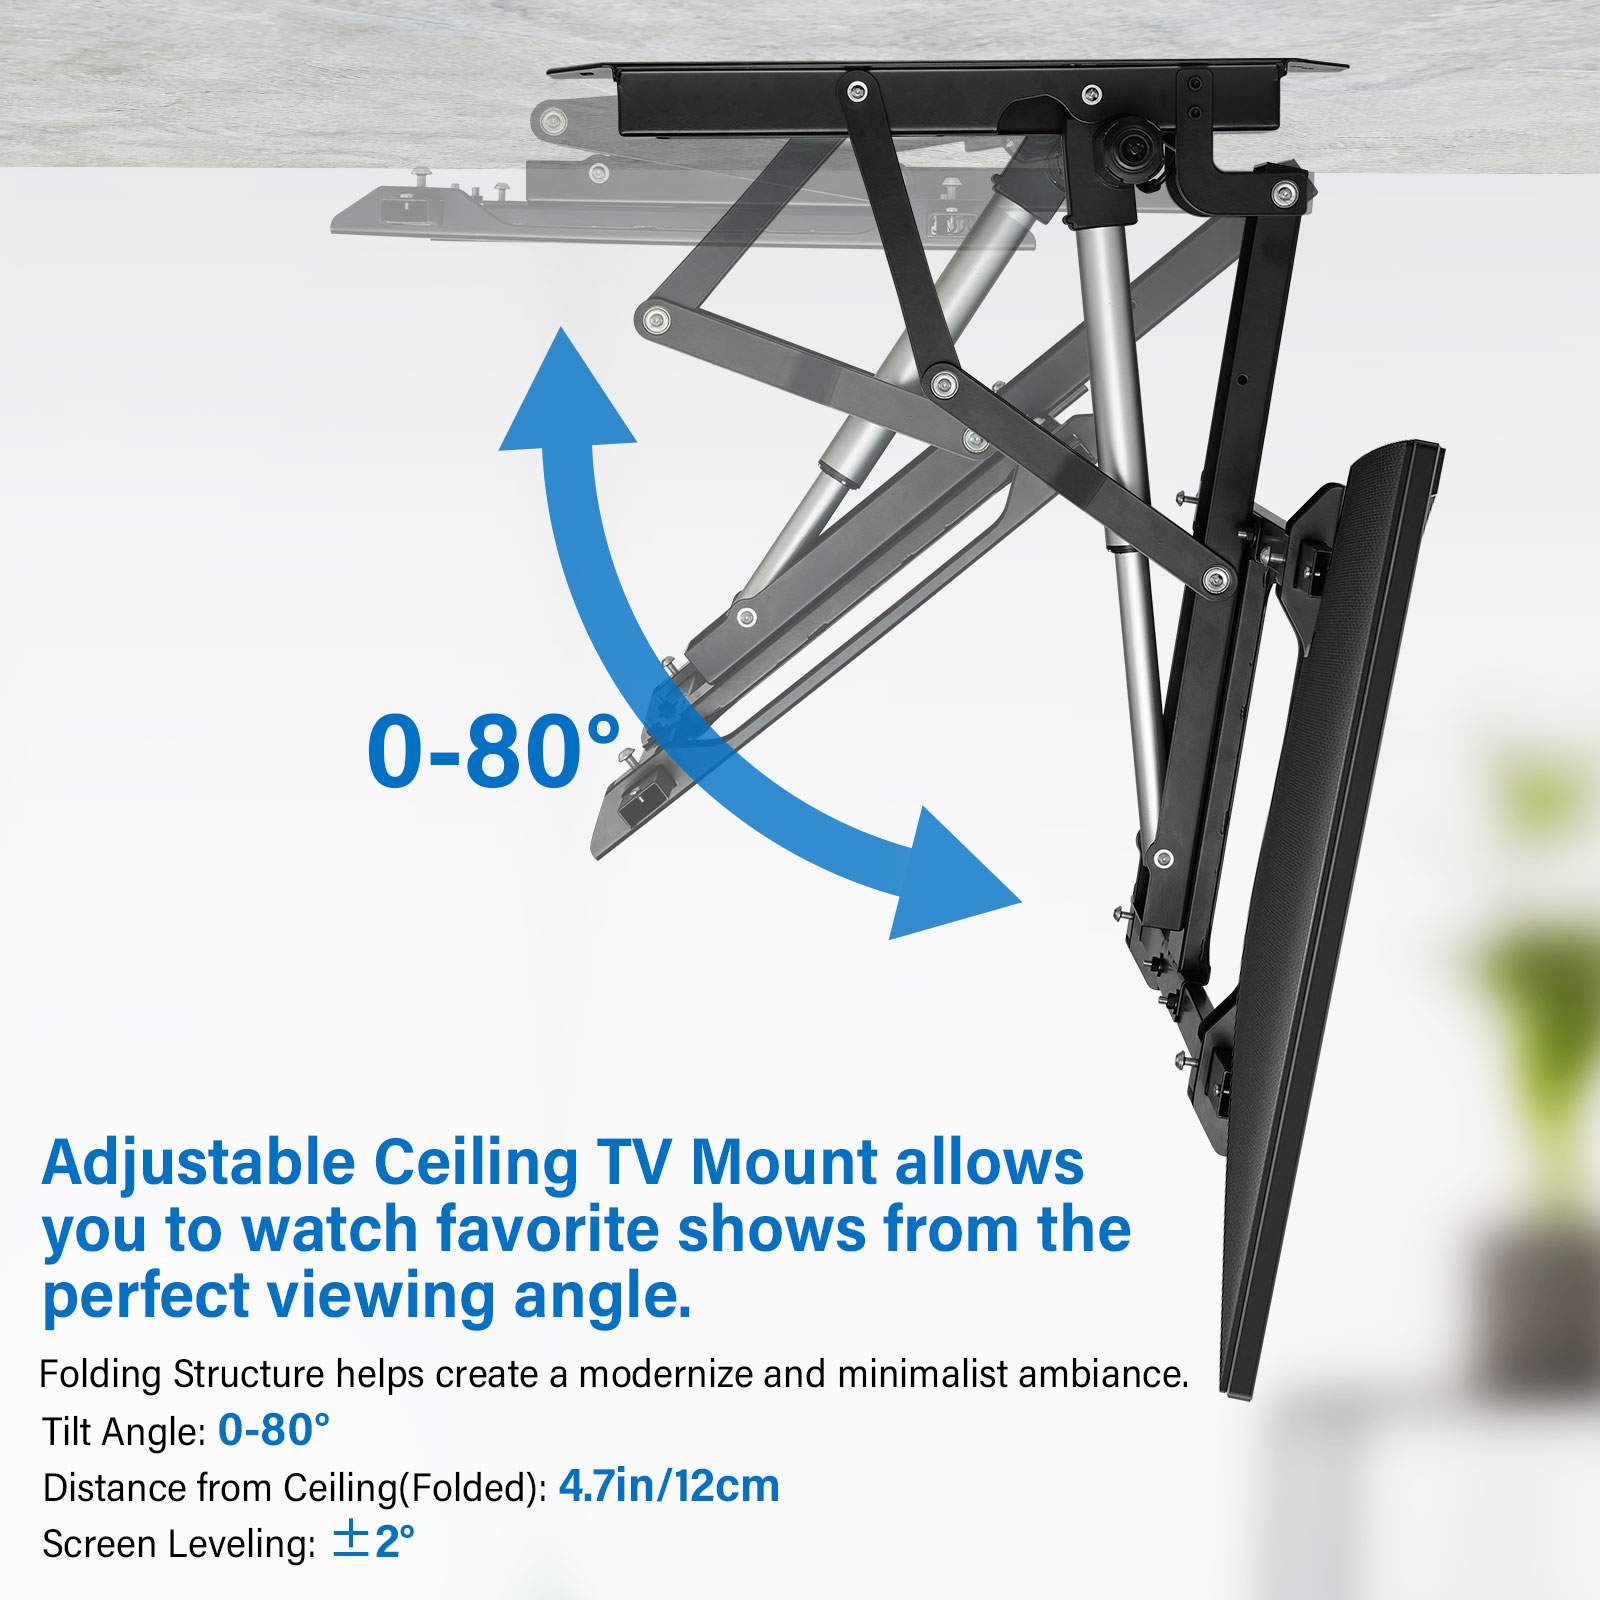 TOPSKY Electric Adjustable Ceiling TV Mount with Remote, Motorized Flip Down Pitched Roof TV Mount for 32 to 70 Inch Flat and Curved Screen TVs TV01.01